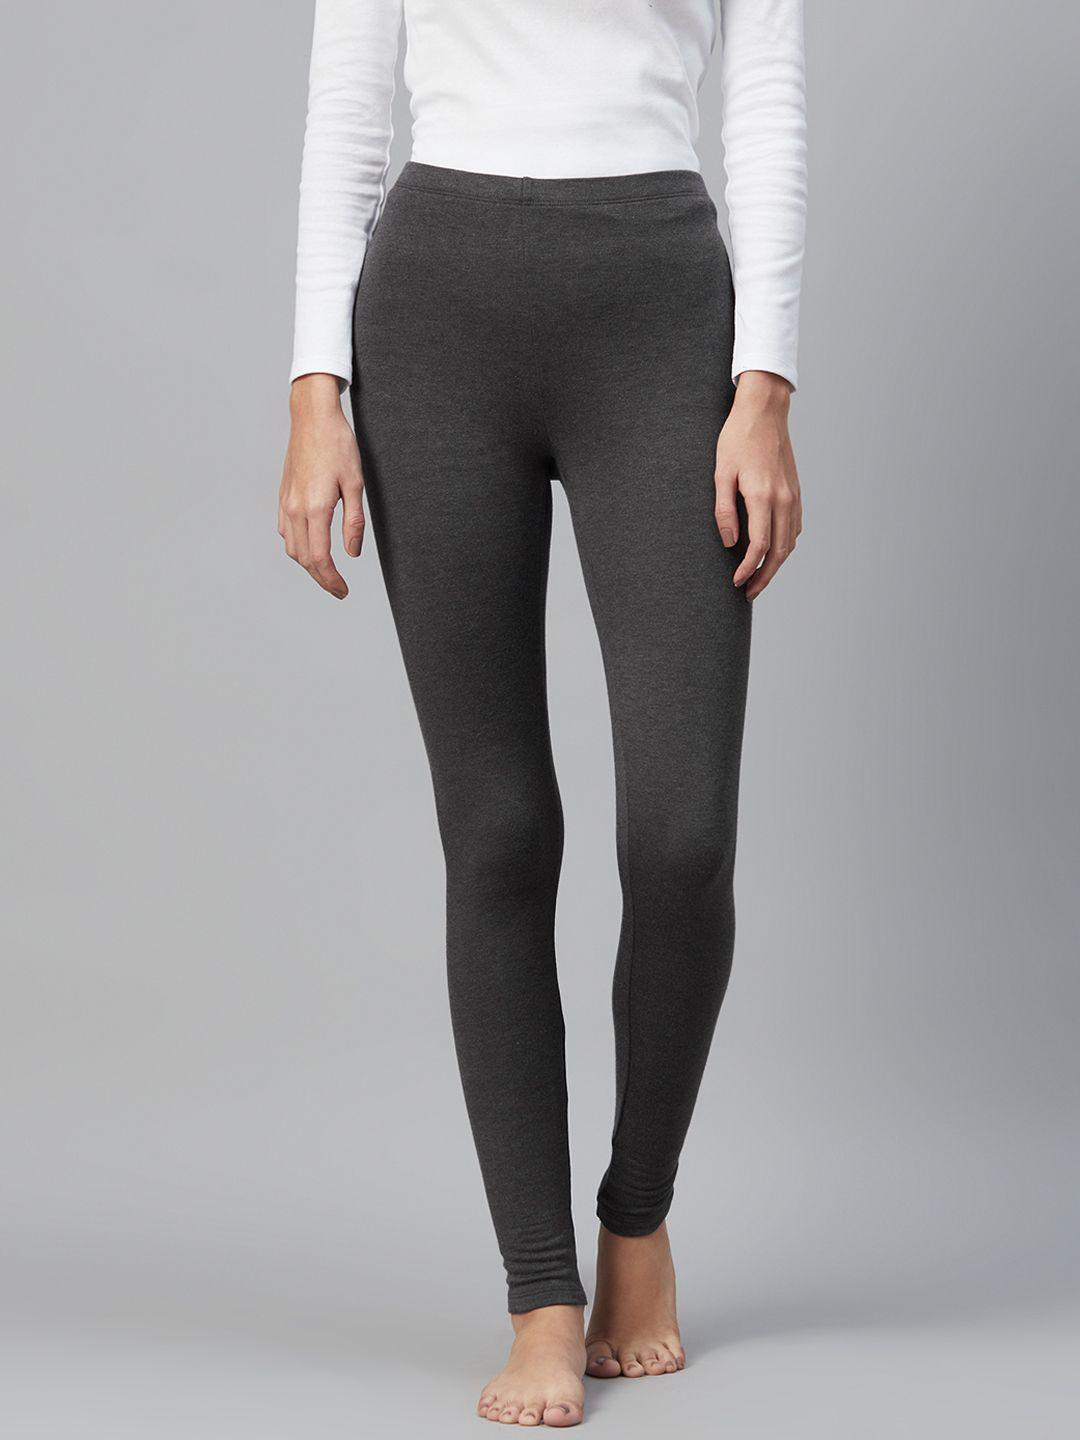 marks & spencer women charcoal grey solid thermal bottom